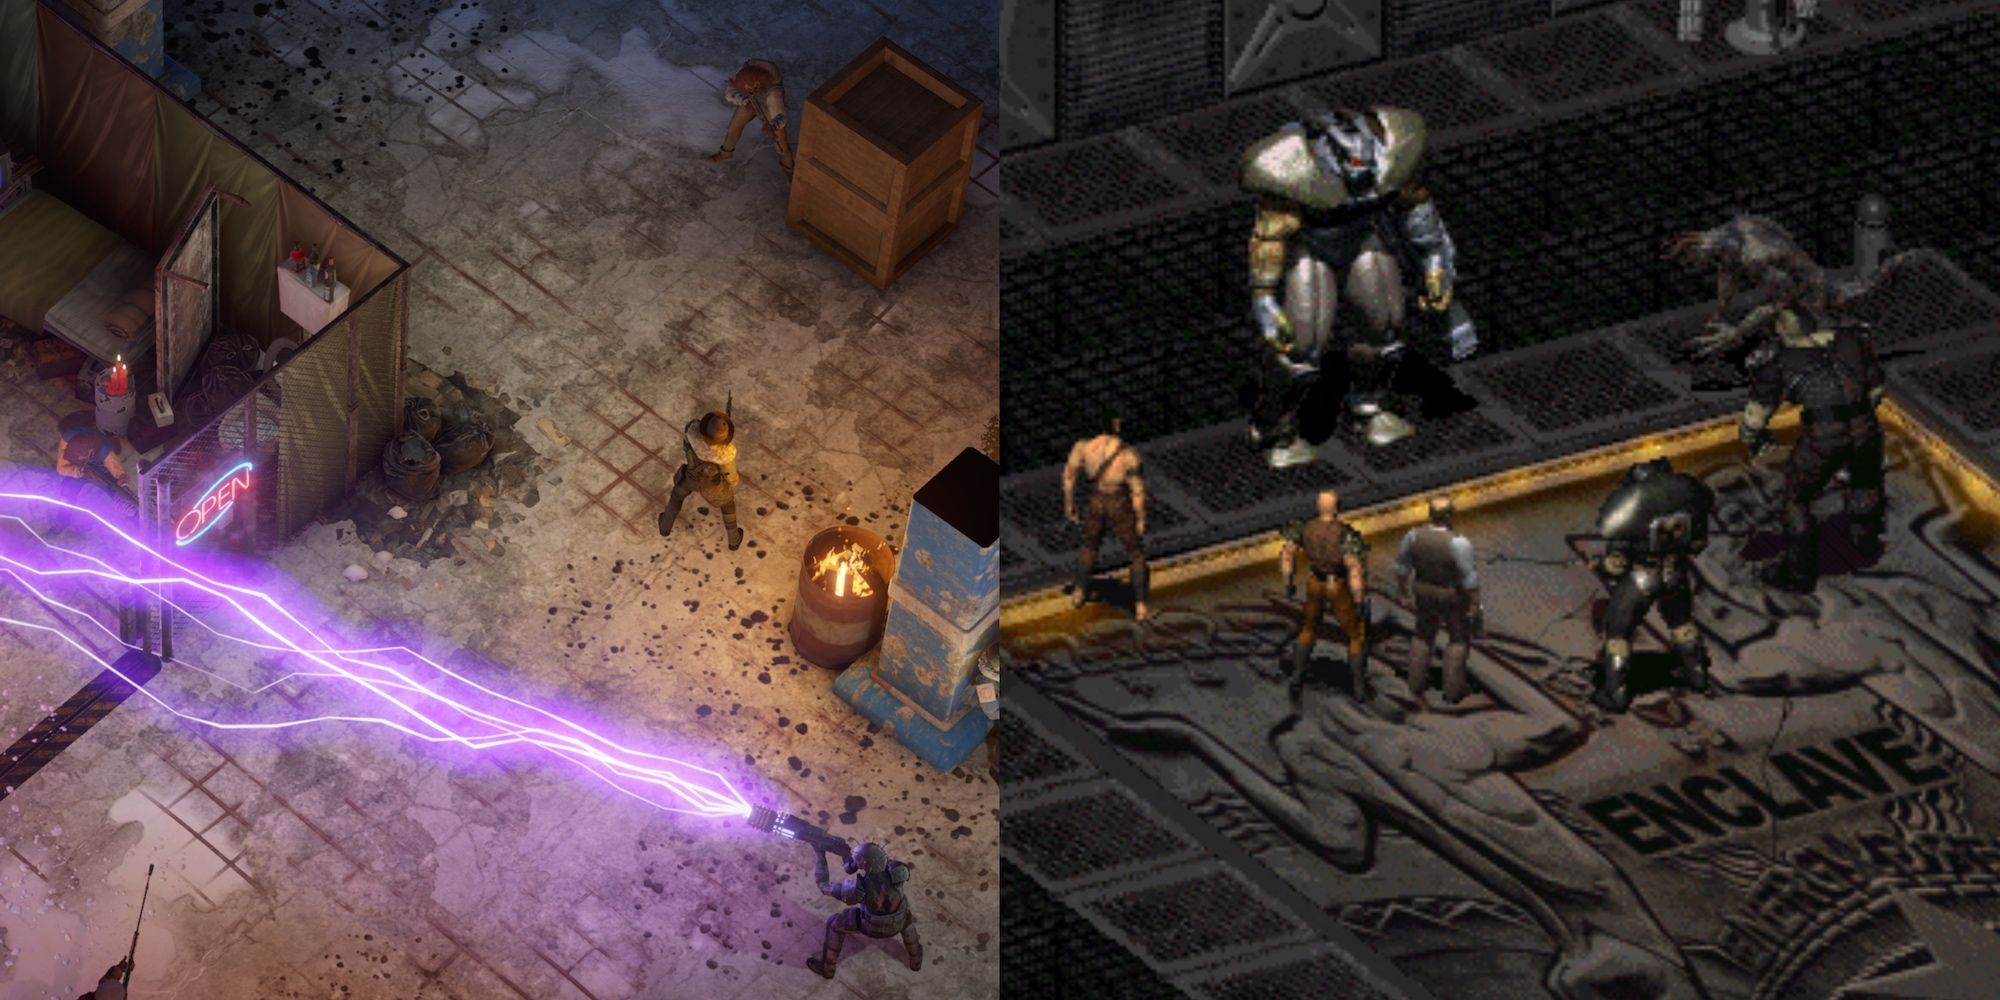 A collage showing gameplay of Fallout 2 on the left, and gameplay of Wasteland 3 on the right.